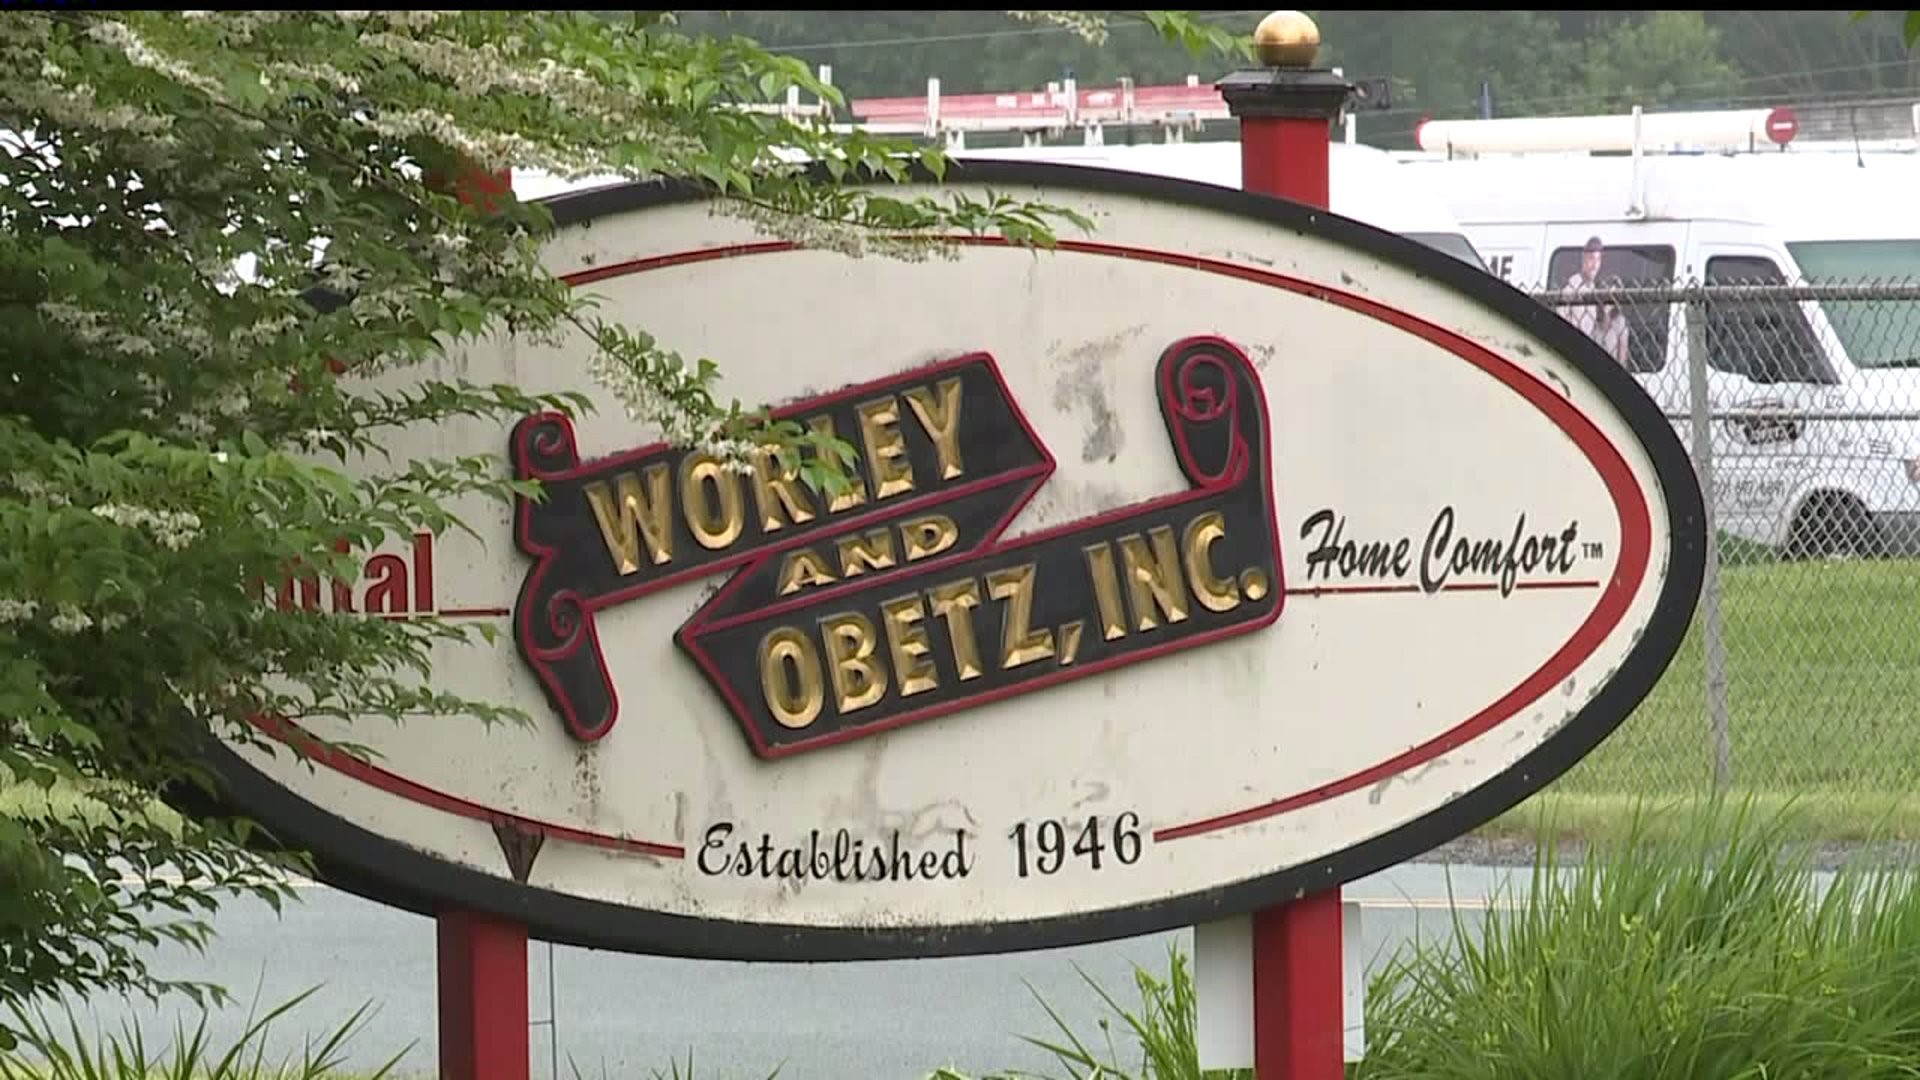 Charges filed against CEO and Controller at Worley and Obetz